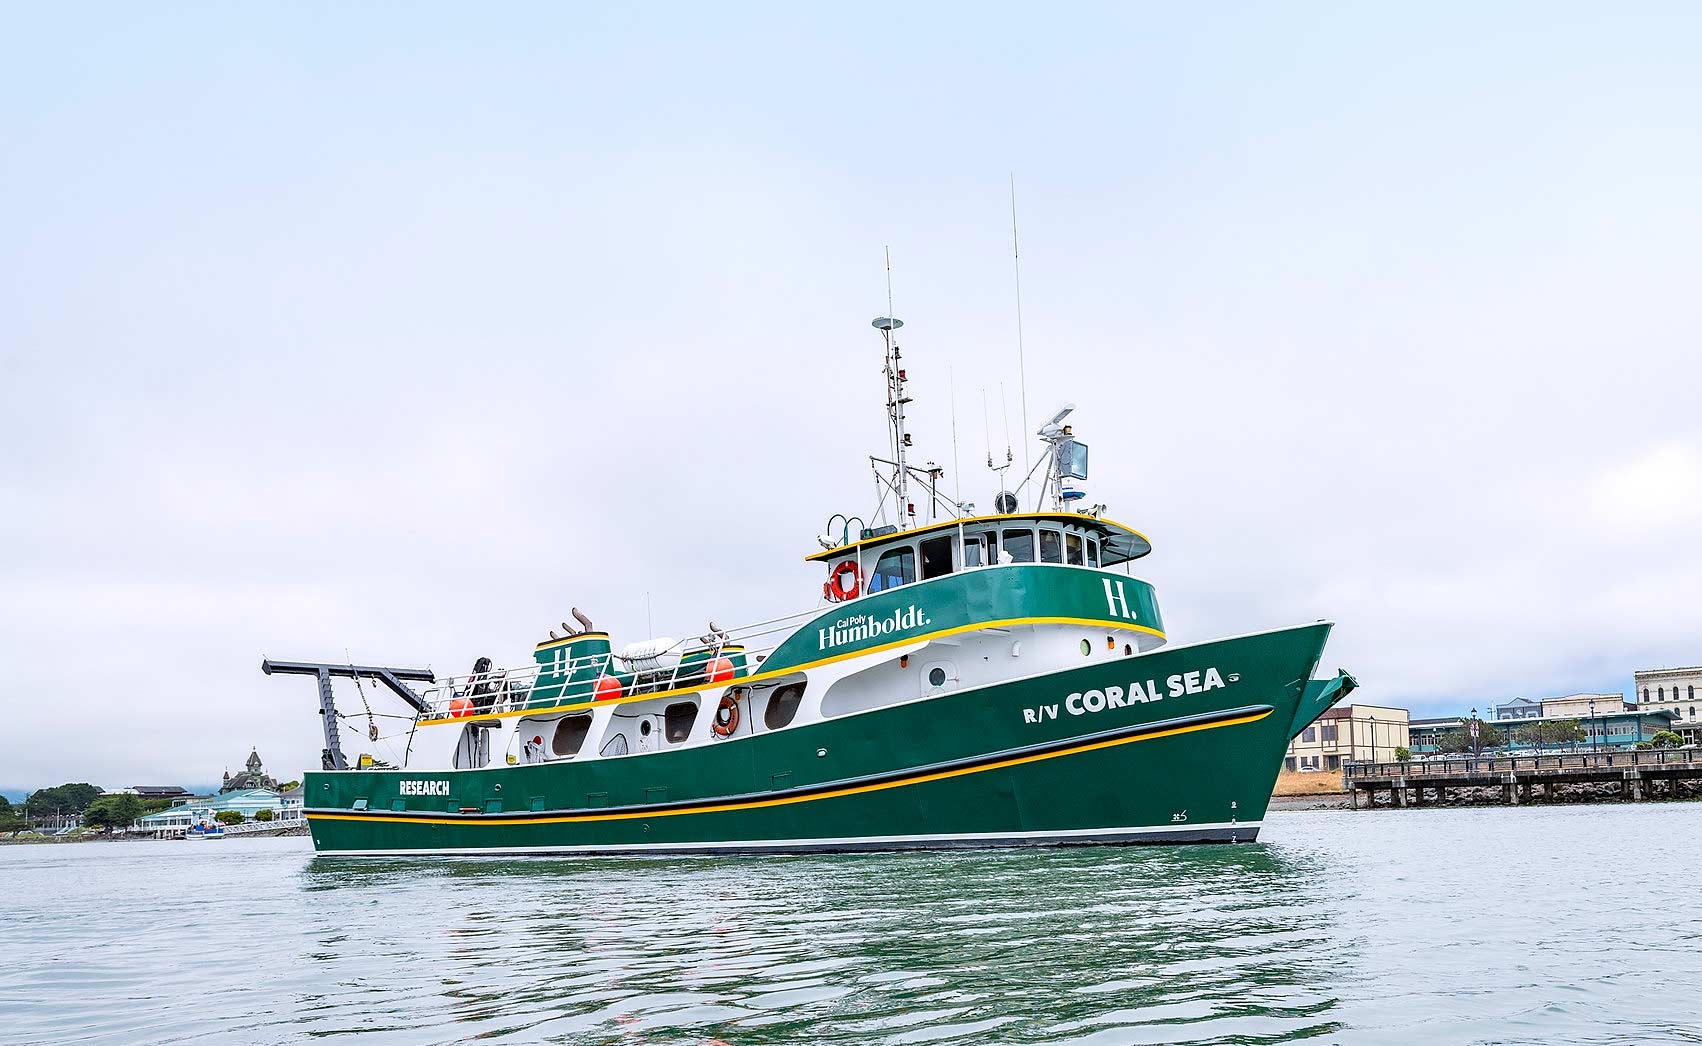 Cal Poly Humboldt Coral Sea research vessel in Humboldt Bay